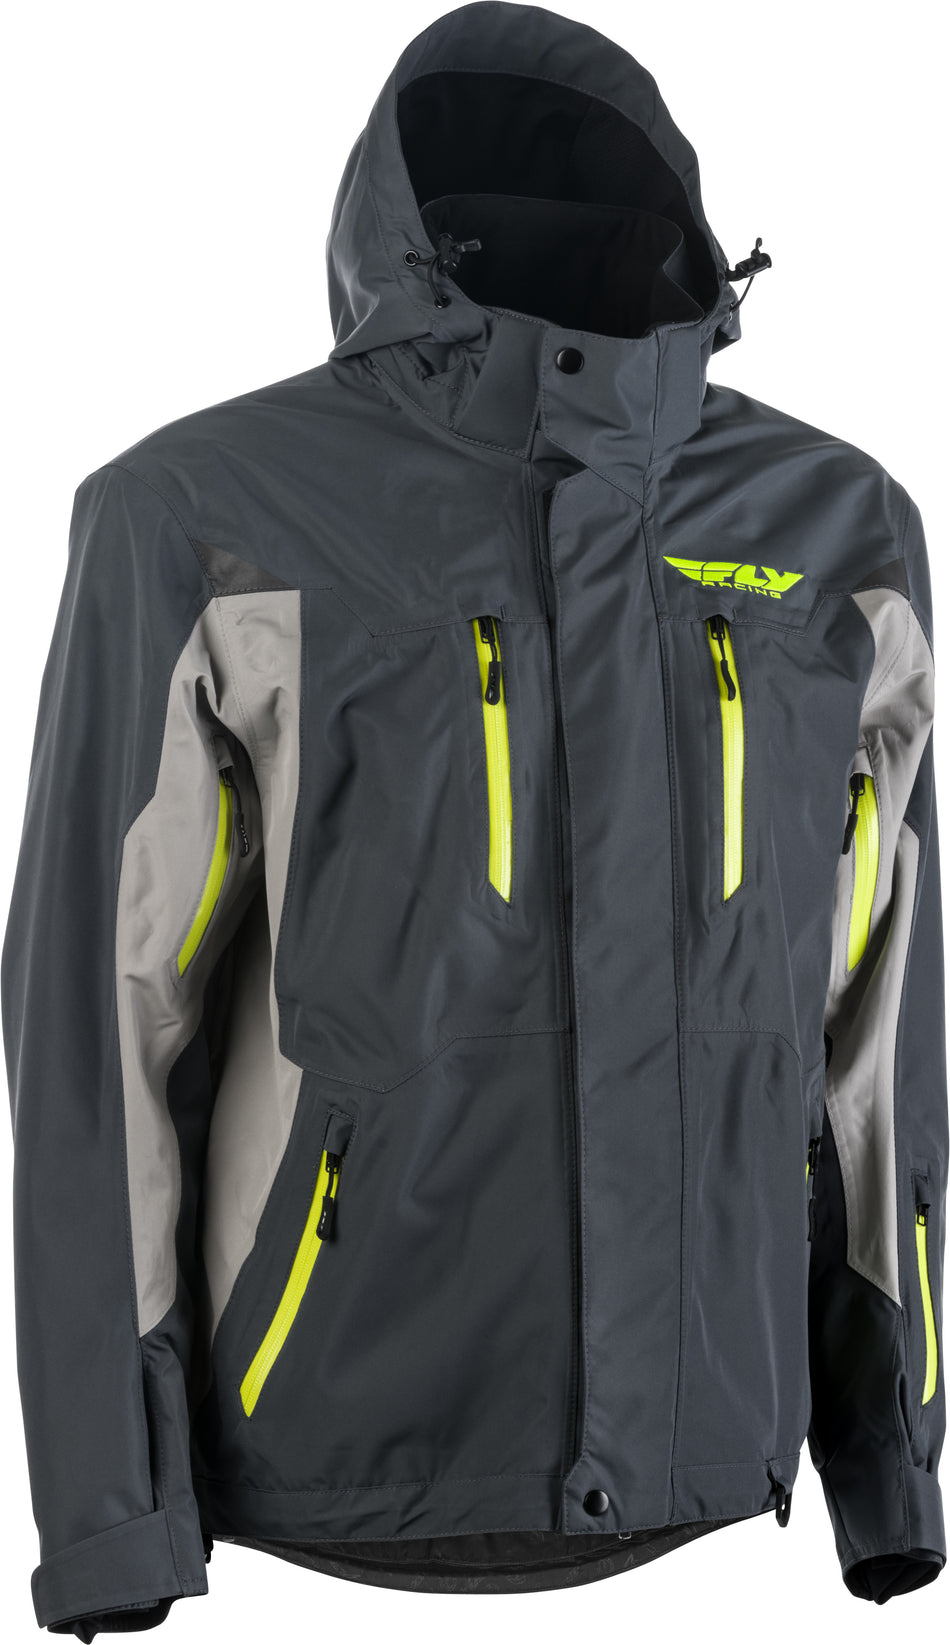 FLY RACING Fly Incline Jacket Grey/Charcoal Xl 470-4101X